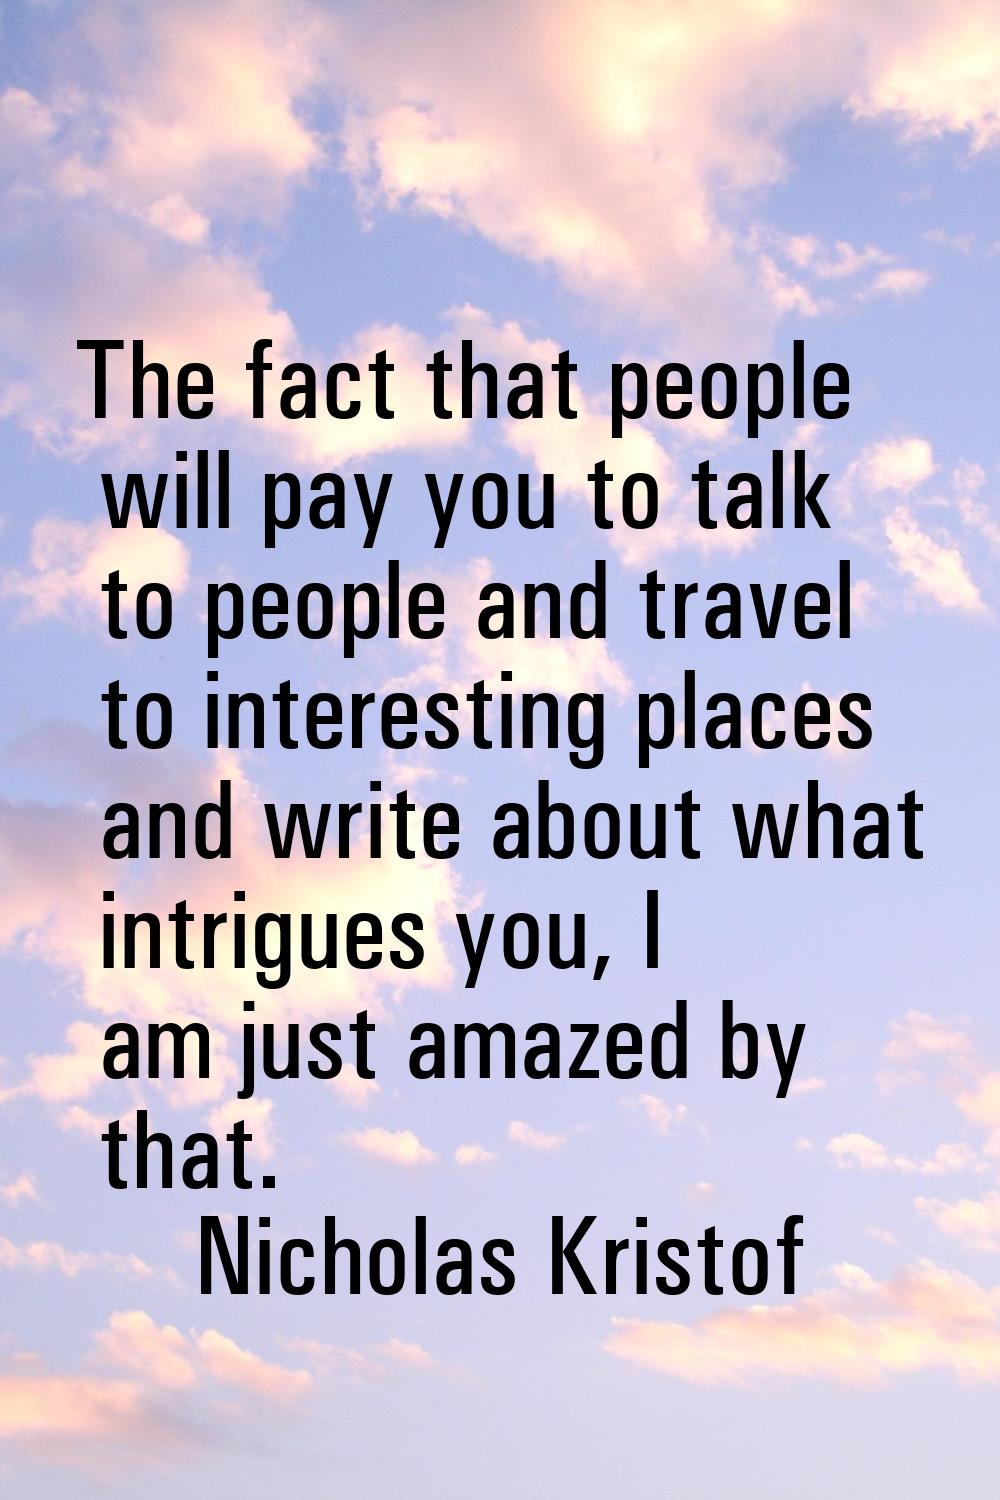 The fact that people will pay you to talk to people and travel to interesting places and write abou